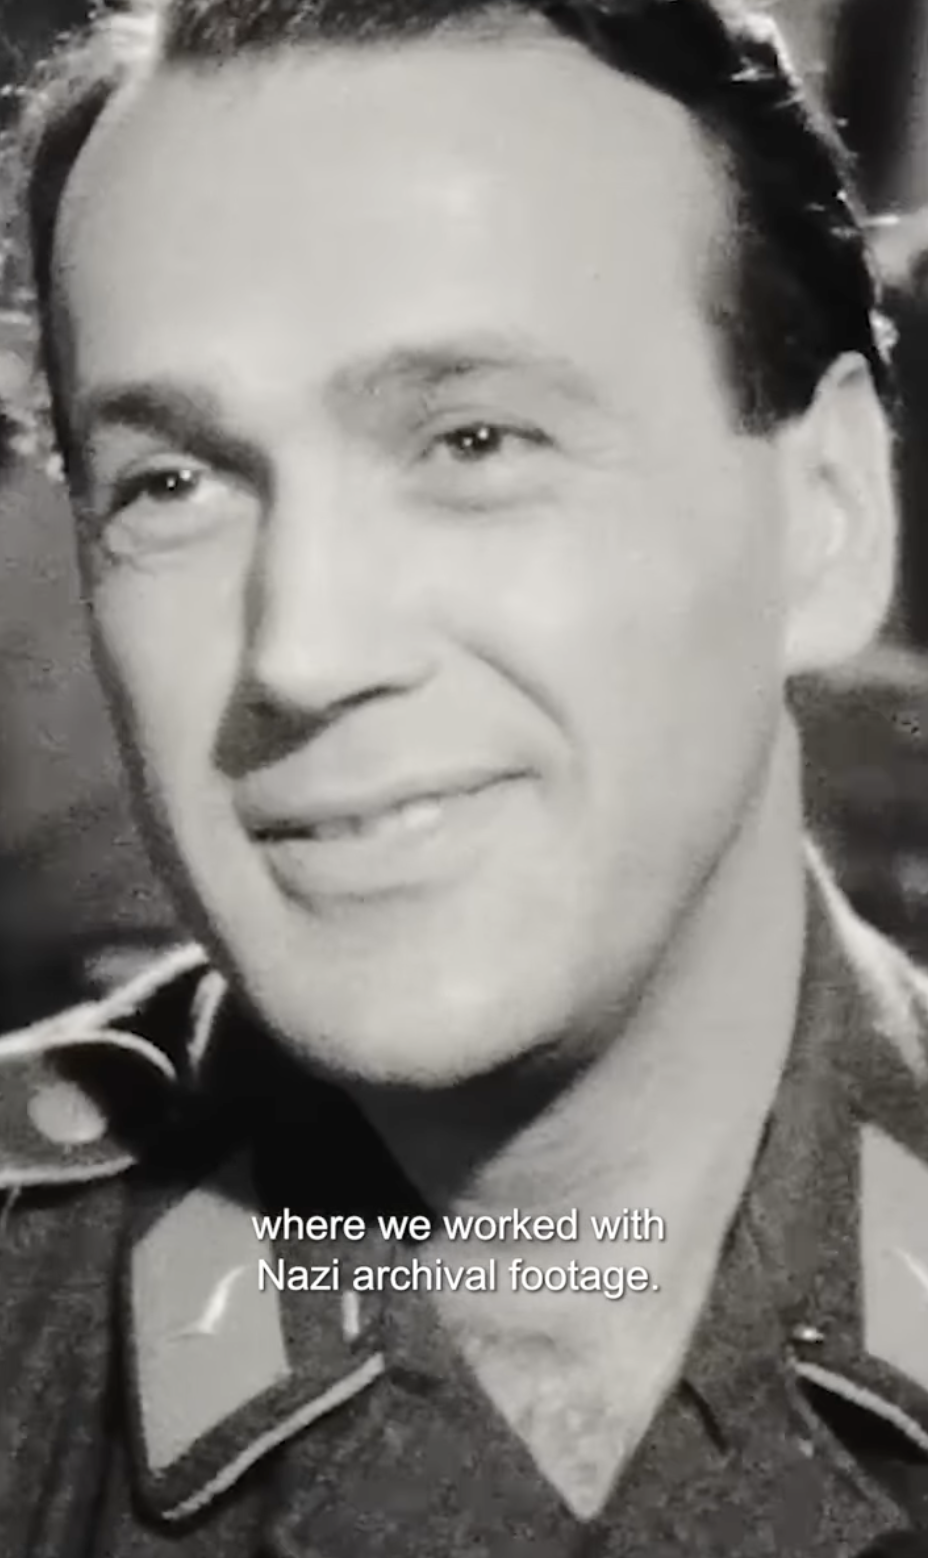 Image of nazi soldier looking into the camera, smiling